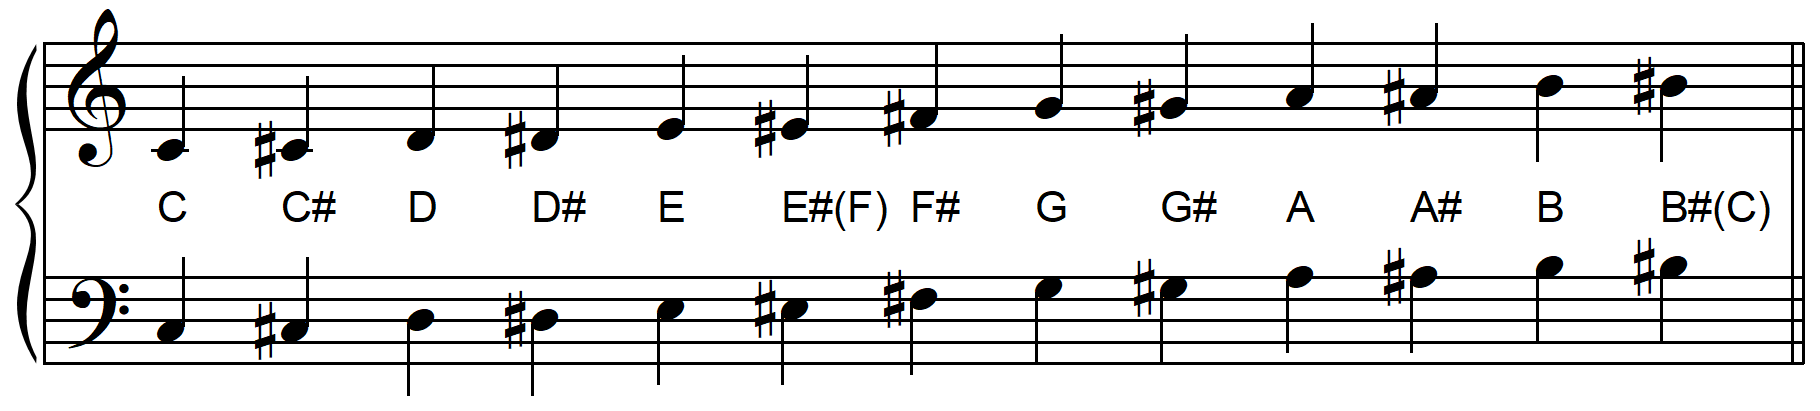 Chromatic scale in staff notation